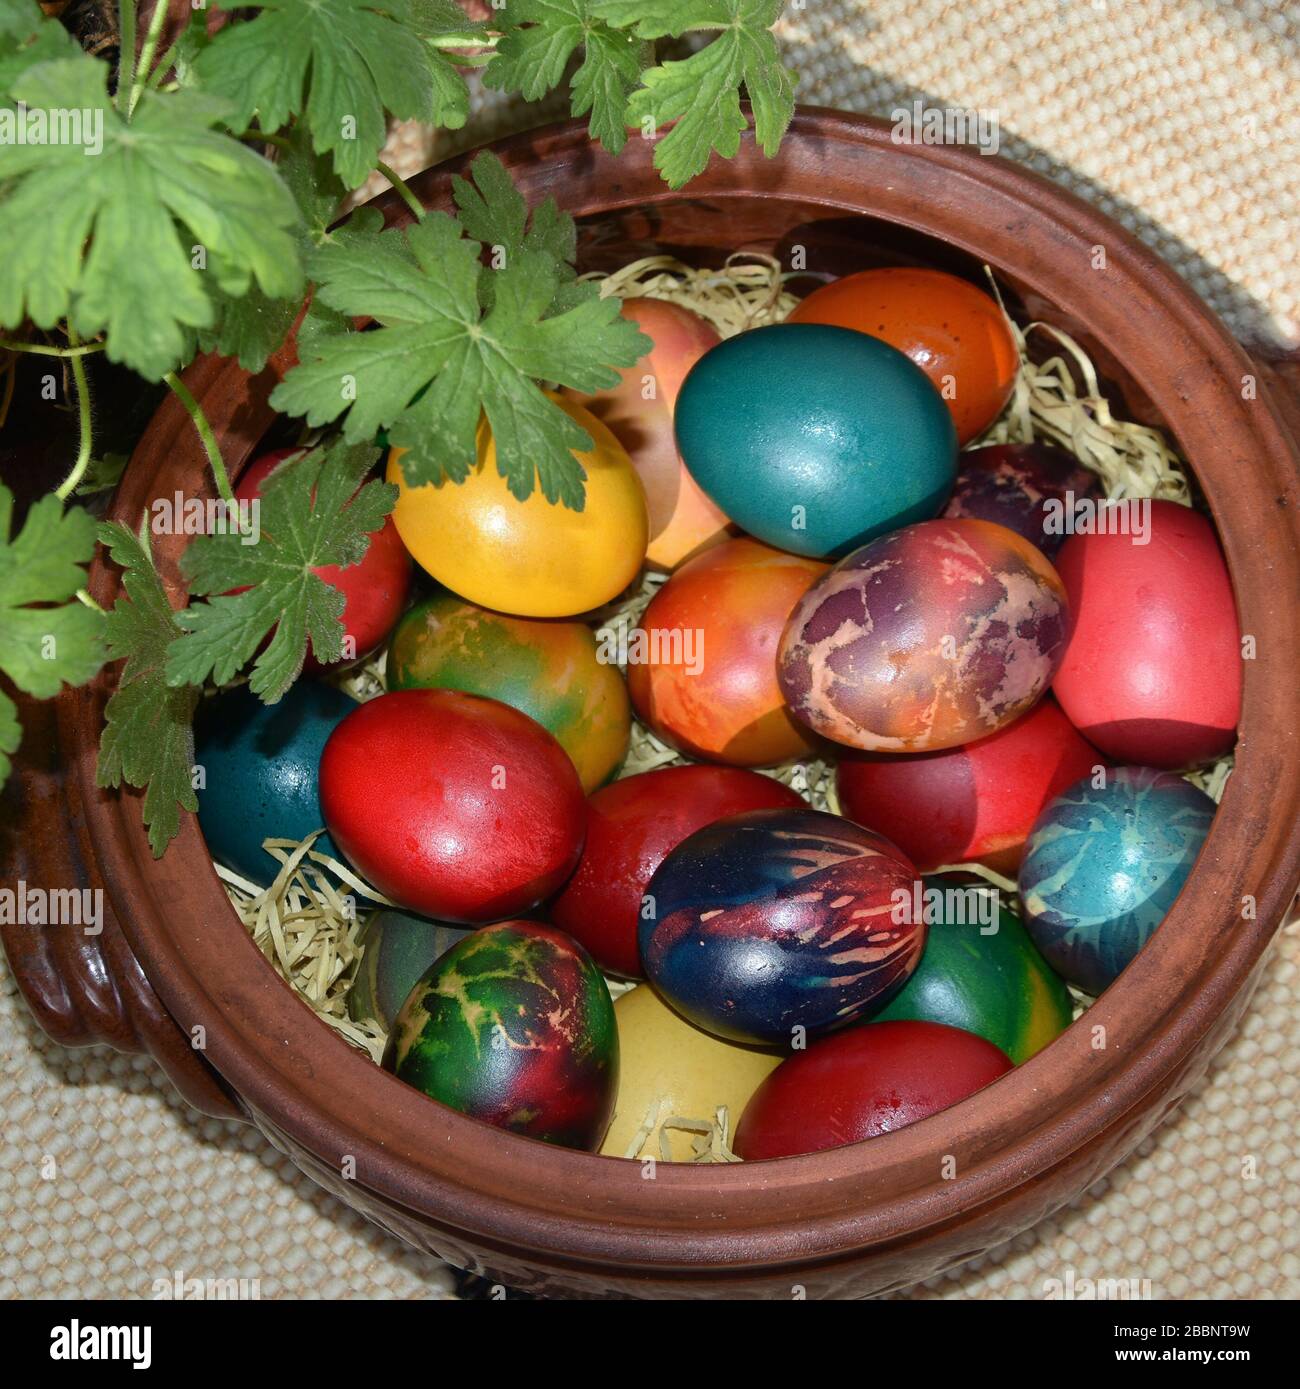 Pot full of multicolored Easter eggs. Green leaves of geranium. Rustic earthenware. Handmade rug at background. Stock Photo